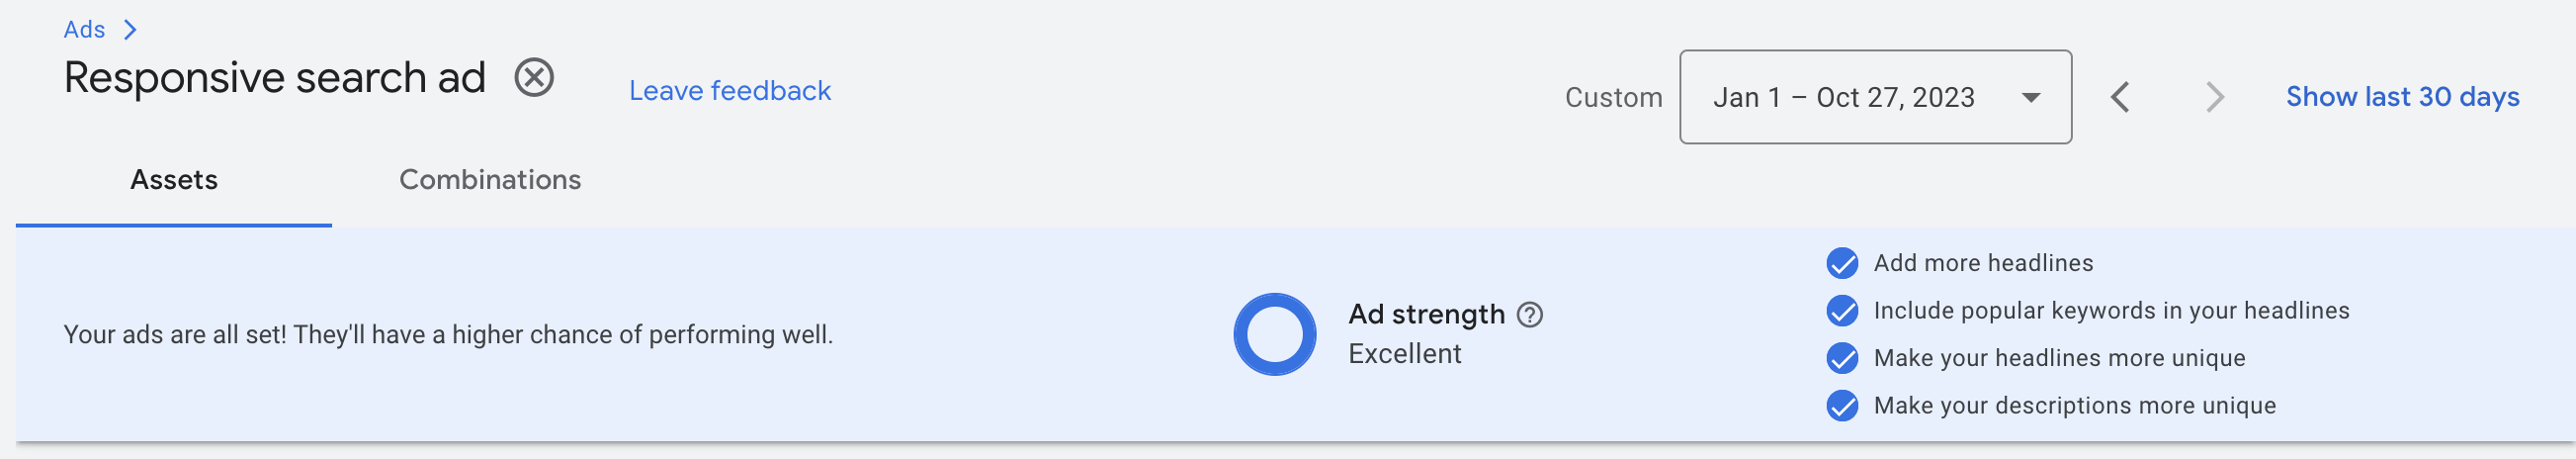 Assets Report in Google Ads 